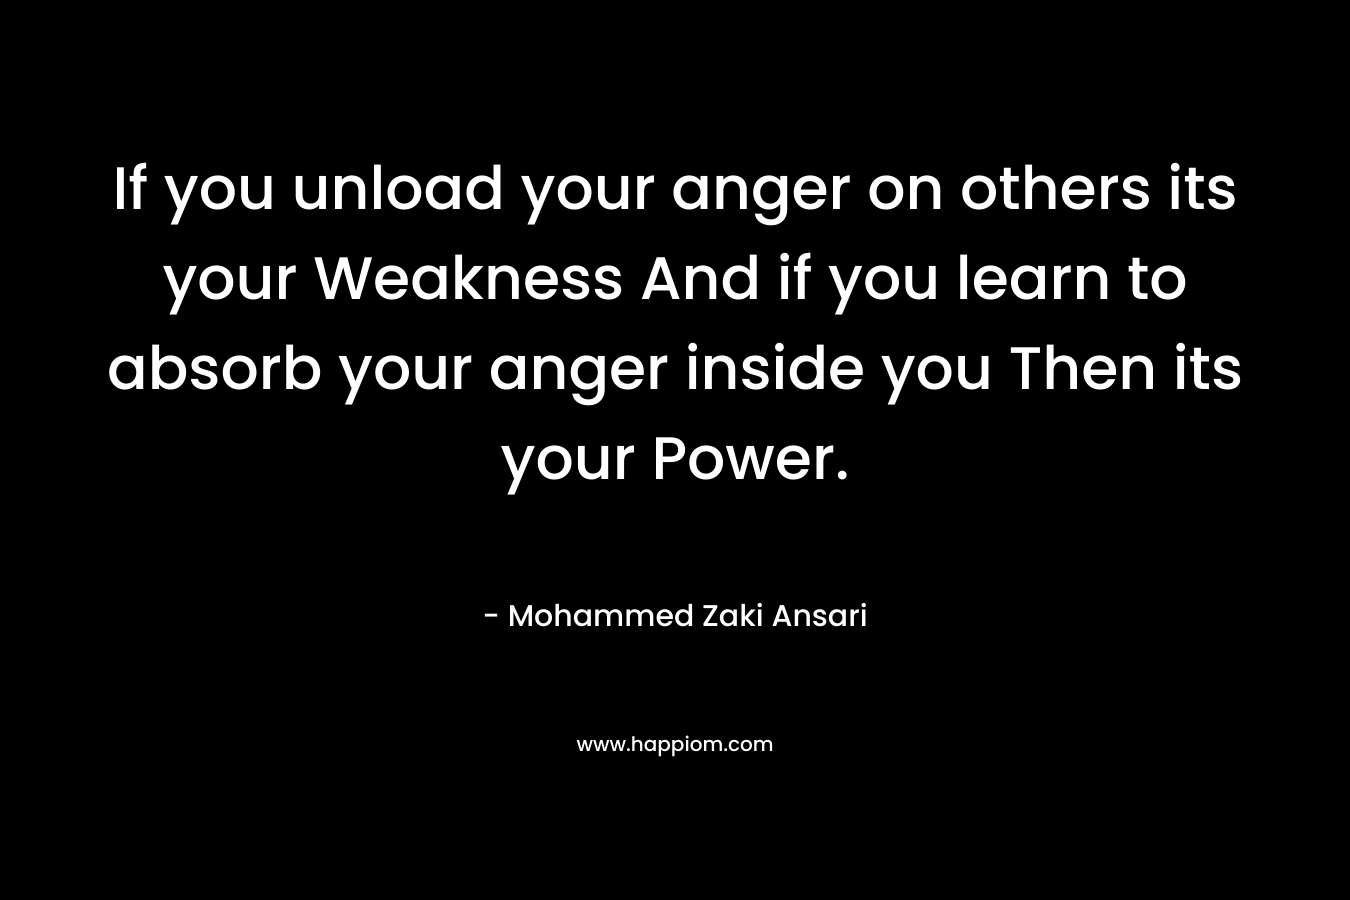 If you unload your anger on others its your Weakness And if you learn to absorb your anger inside you Then its your Power.